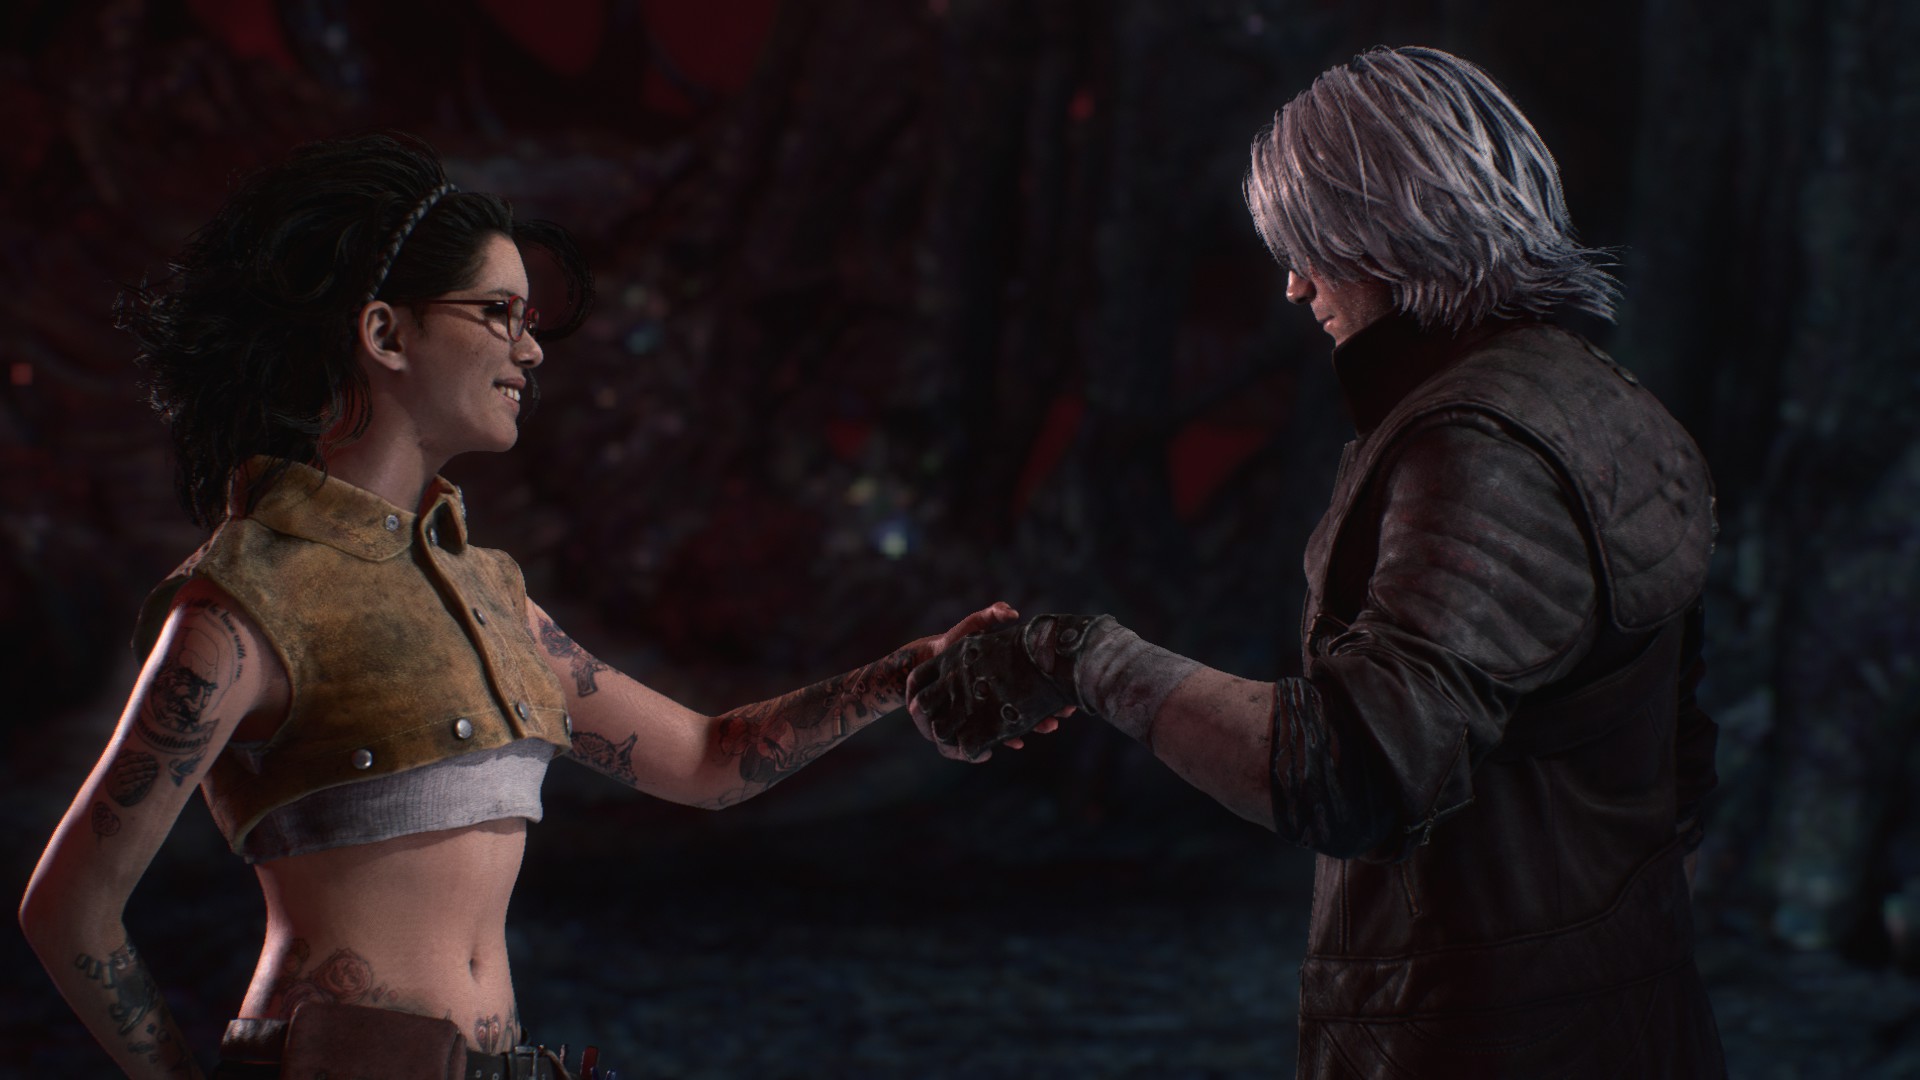 Devil May Cry 5's coming in spring 2019 and it stars Nero, Dante, and a  wise-talking mechanic